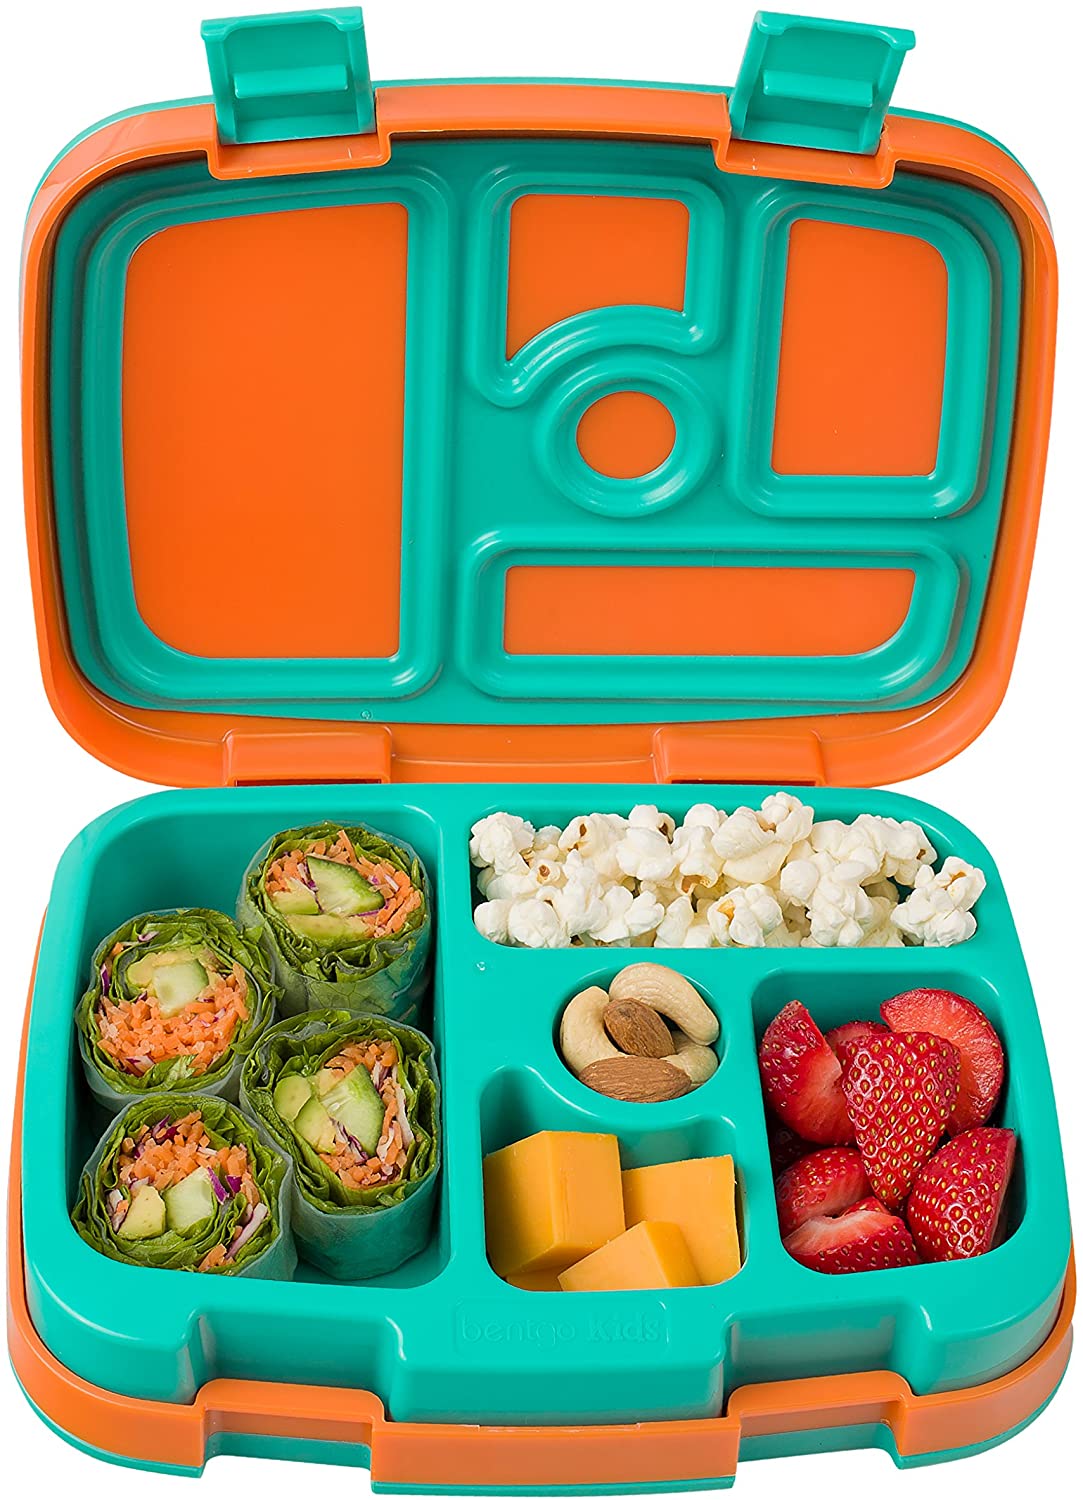 Review of Bentgo Kids Brights Leak-Proof, 5-Compartment Bento-Style Kids Lunch Box